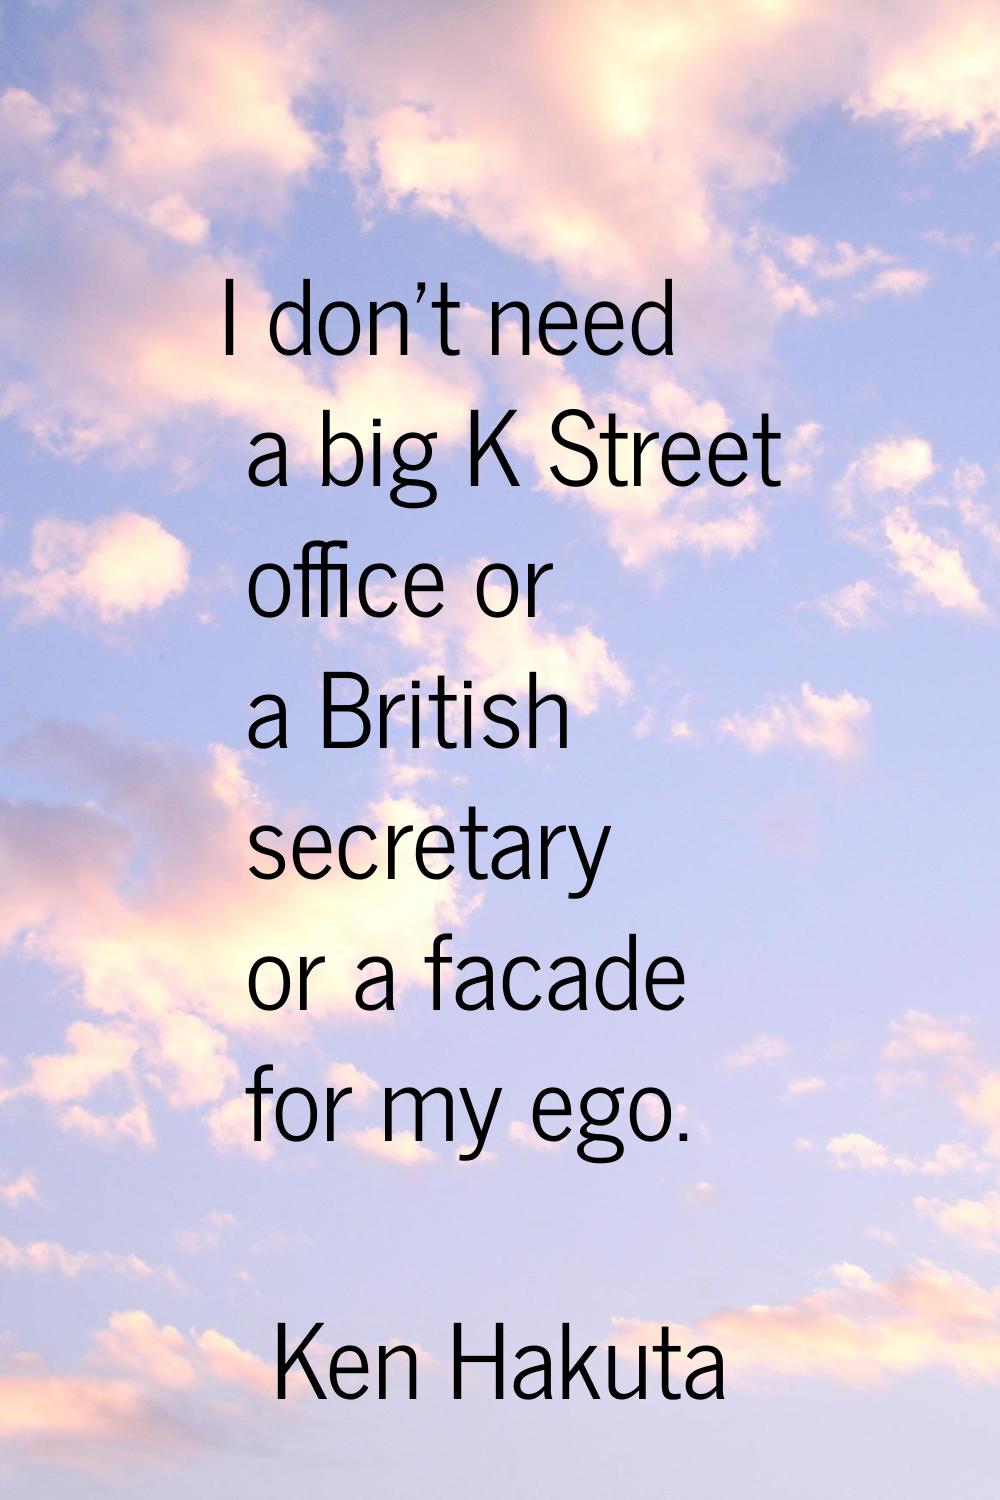 I don't need a big K Street office or a British secretary or a facade for my ego.